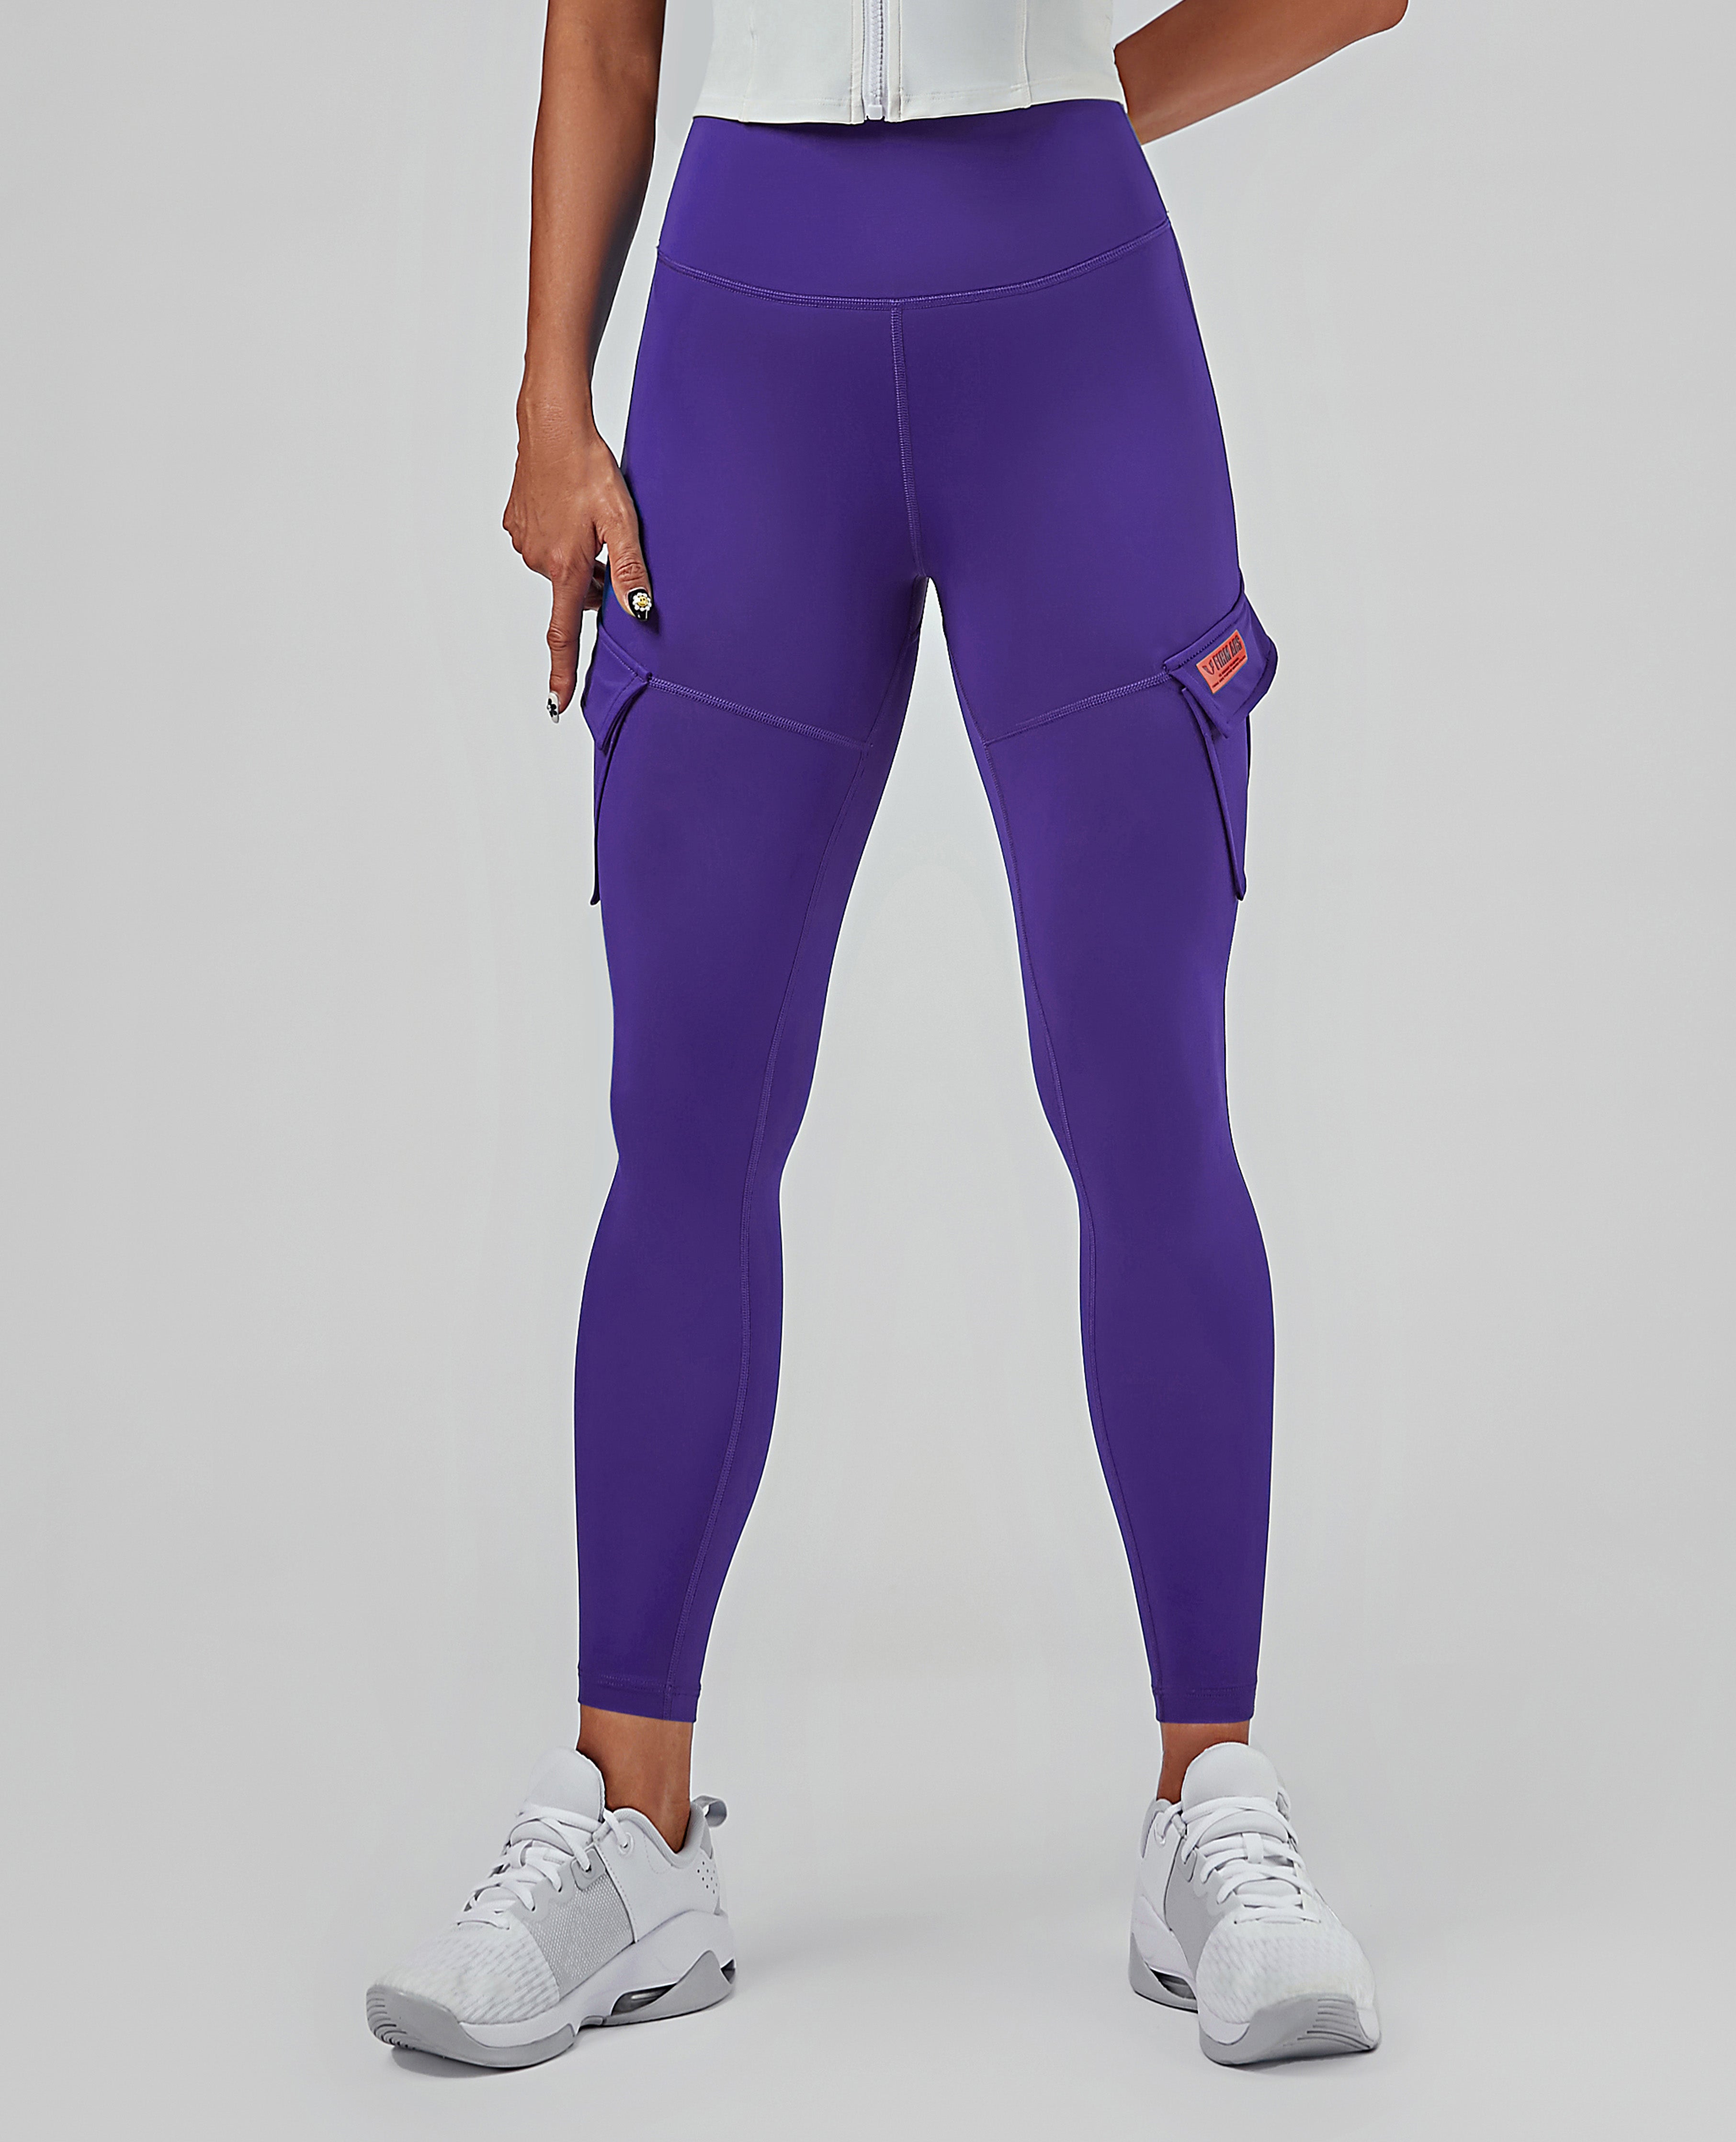 Purple High-Rise Yoga/workout Leggings - XL - Pockets - New With